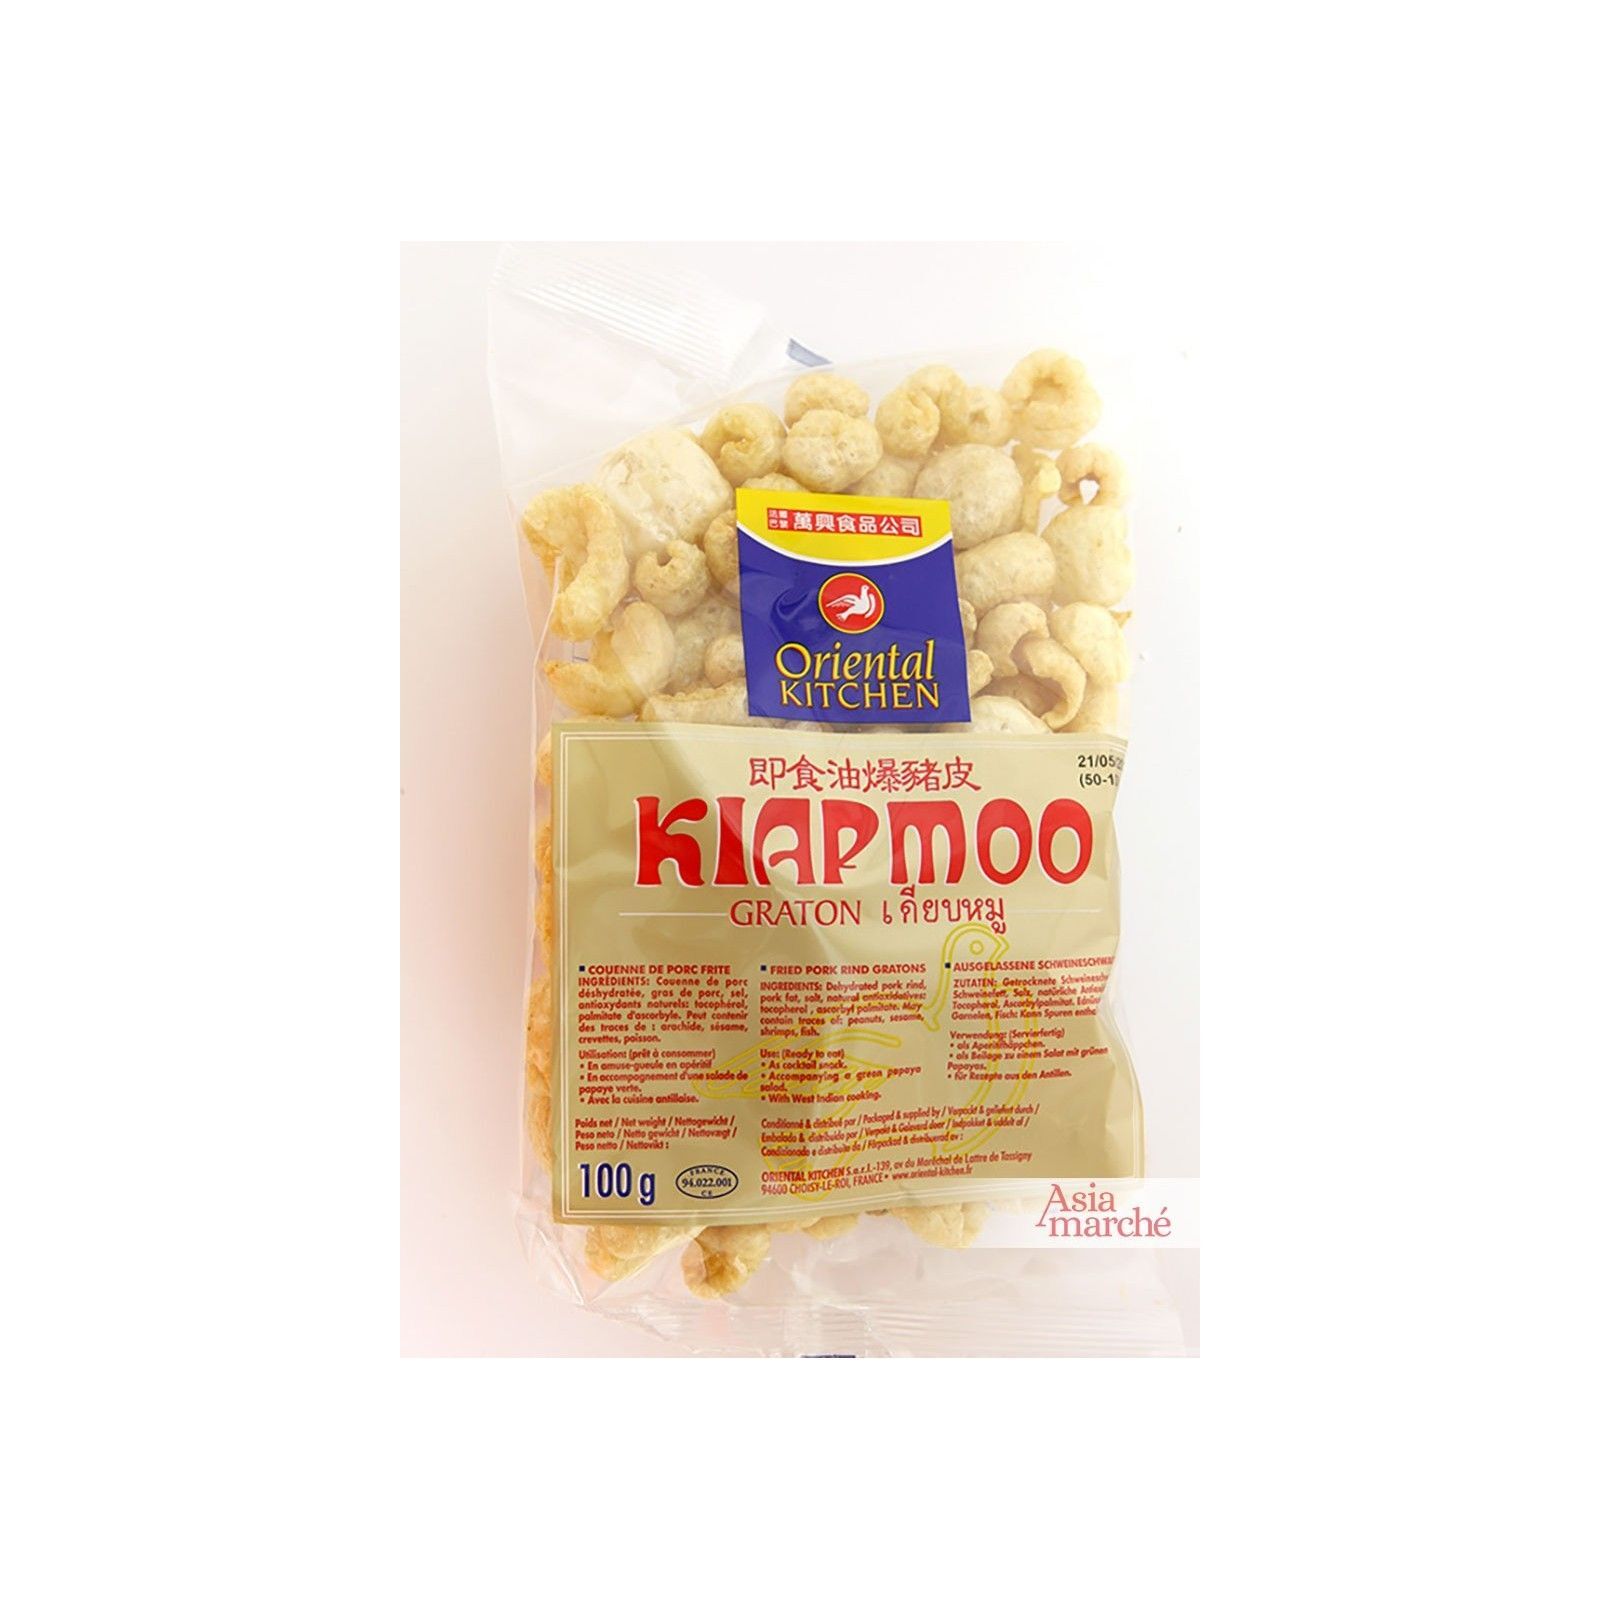 Asia Marché Kiap Moo, grattons, couenne frite 100g